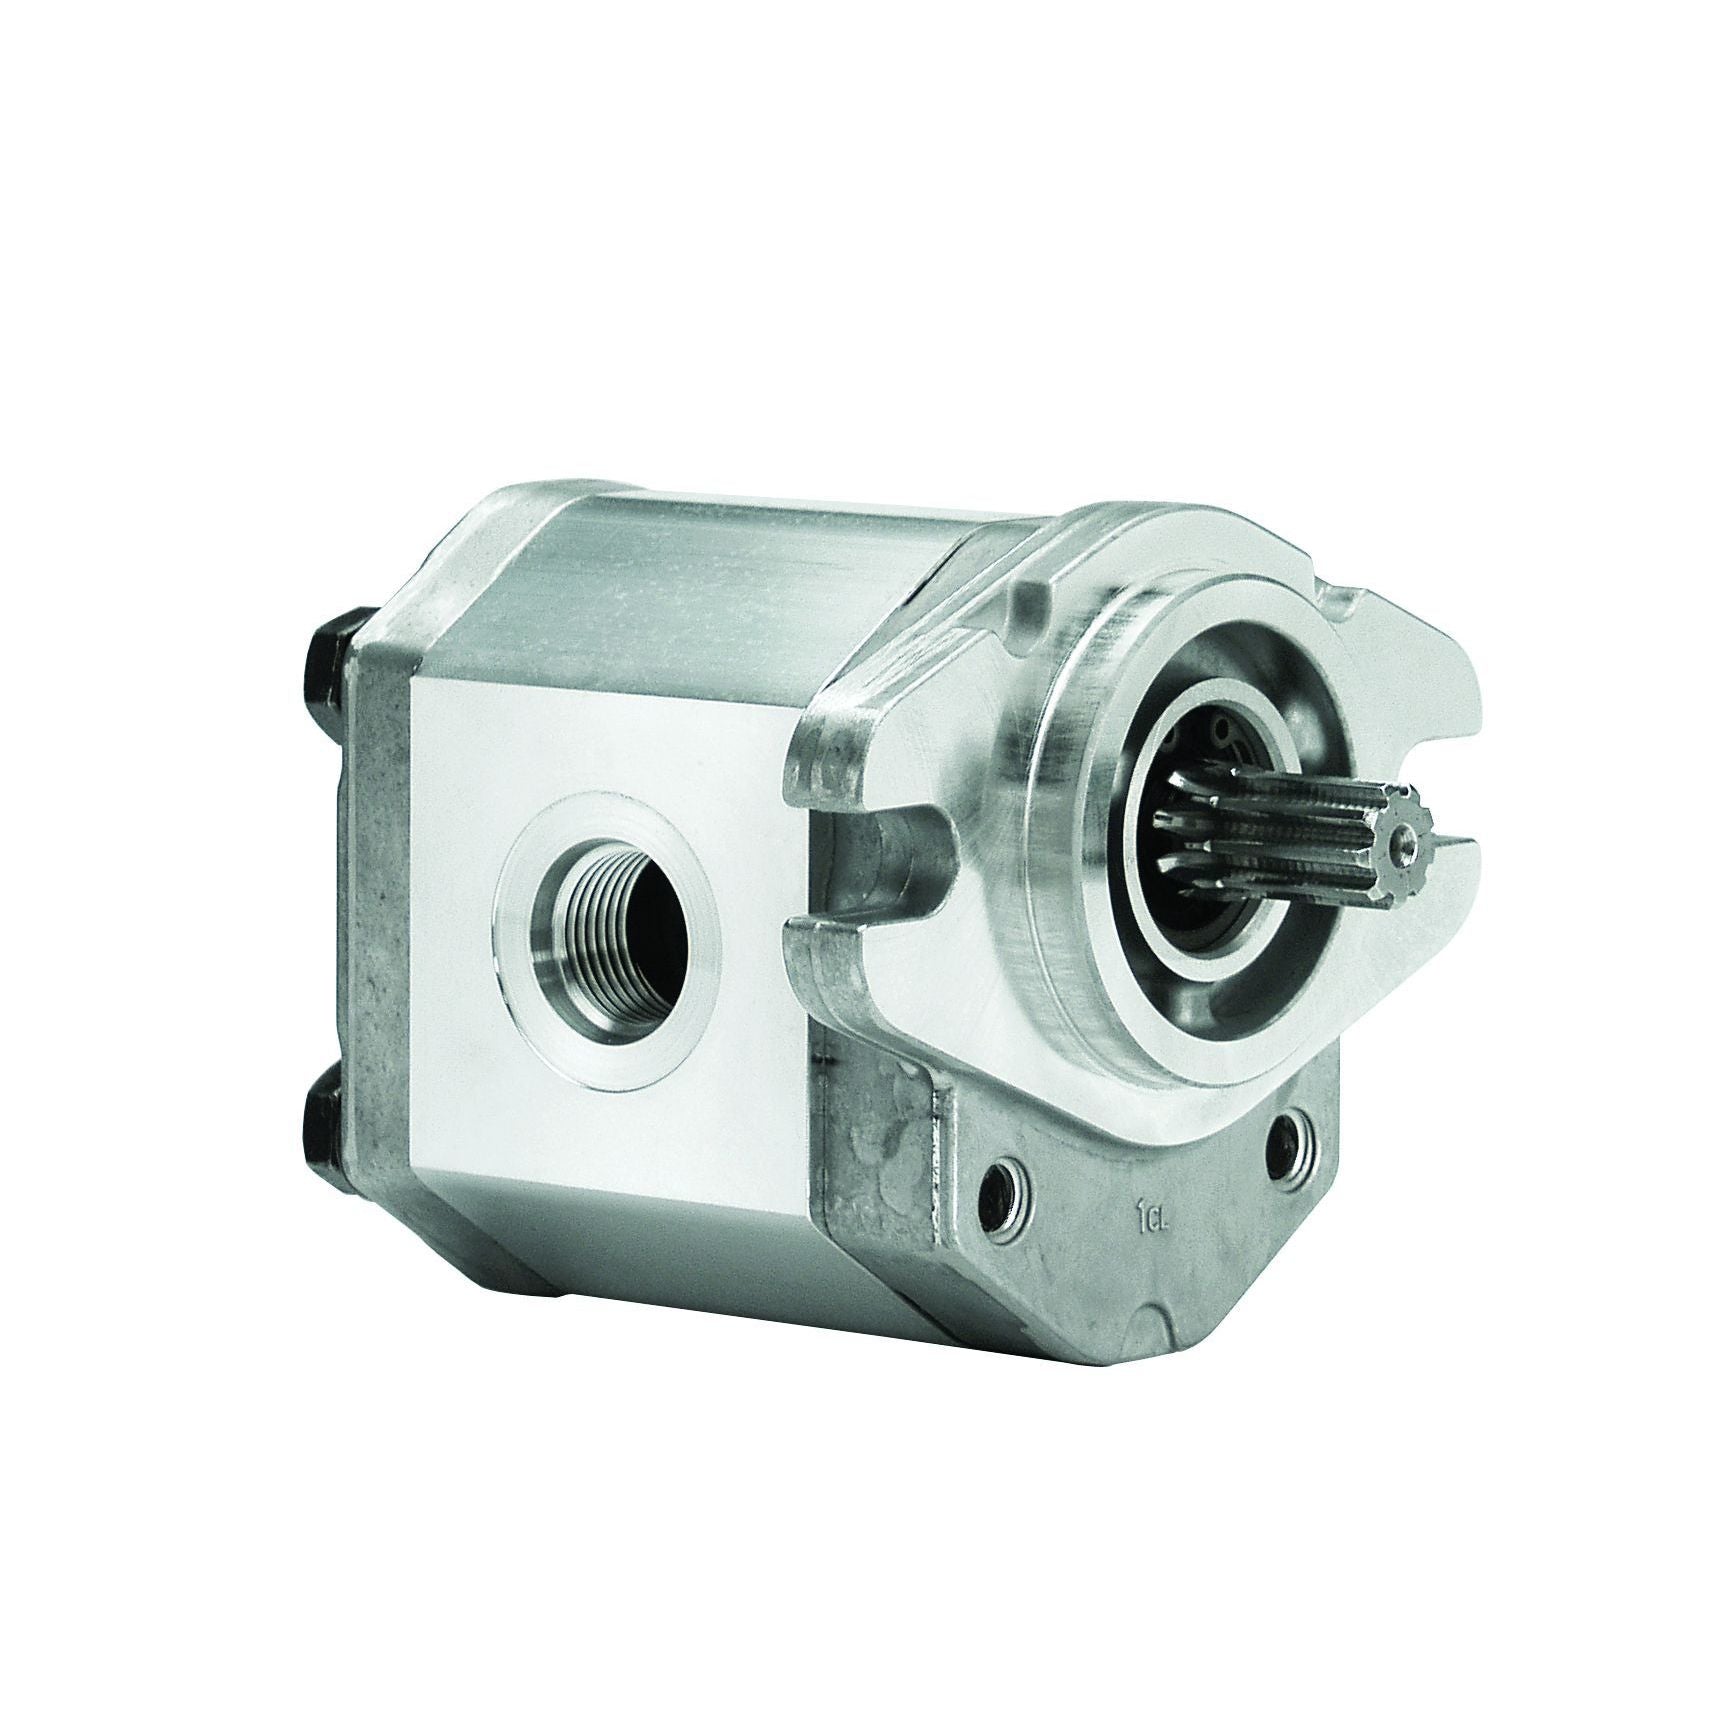 ALP3A-S-60-S1-FA : Marzocchi Gear Pump, CCW, 39cc (2.379in3), 18.54 GPM, 3190psi, 3000 RPM, #20 SAE (1.25") In, #12 SAE (3/4") Out, Splined Shaft 13T 16/32DP, SAE B 2-Bolt Mount